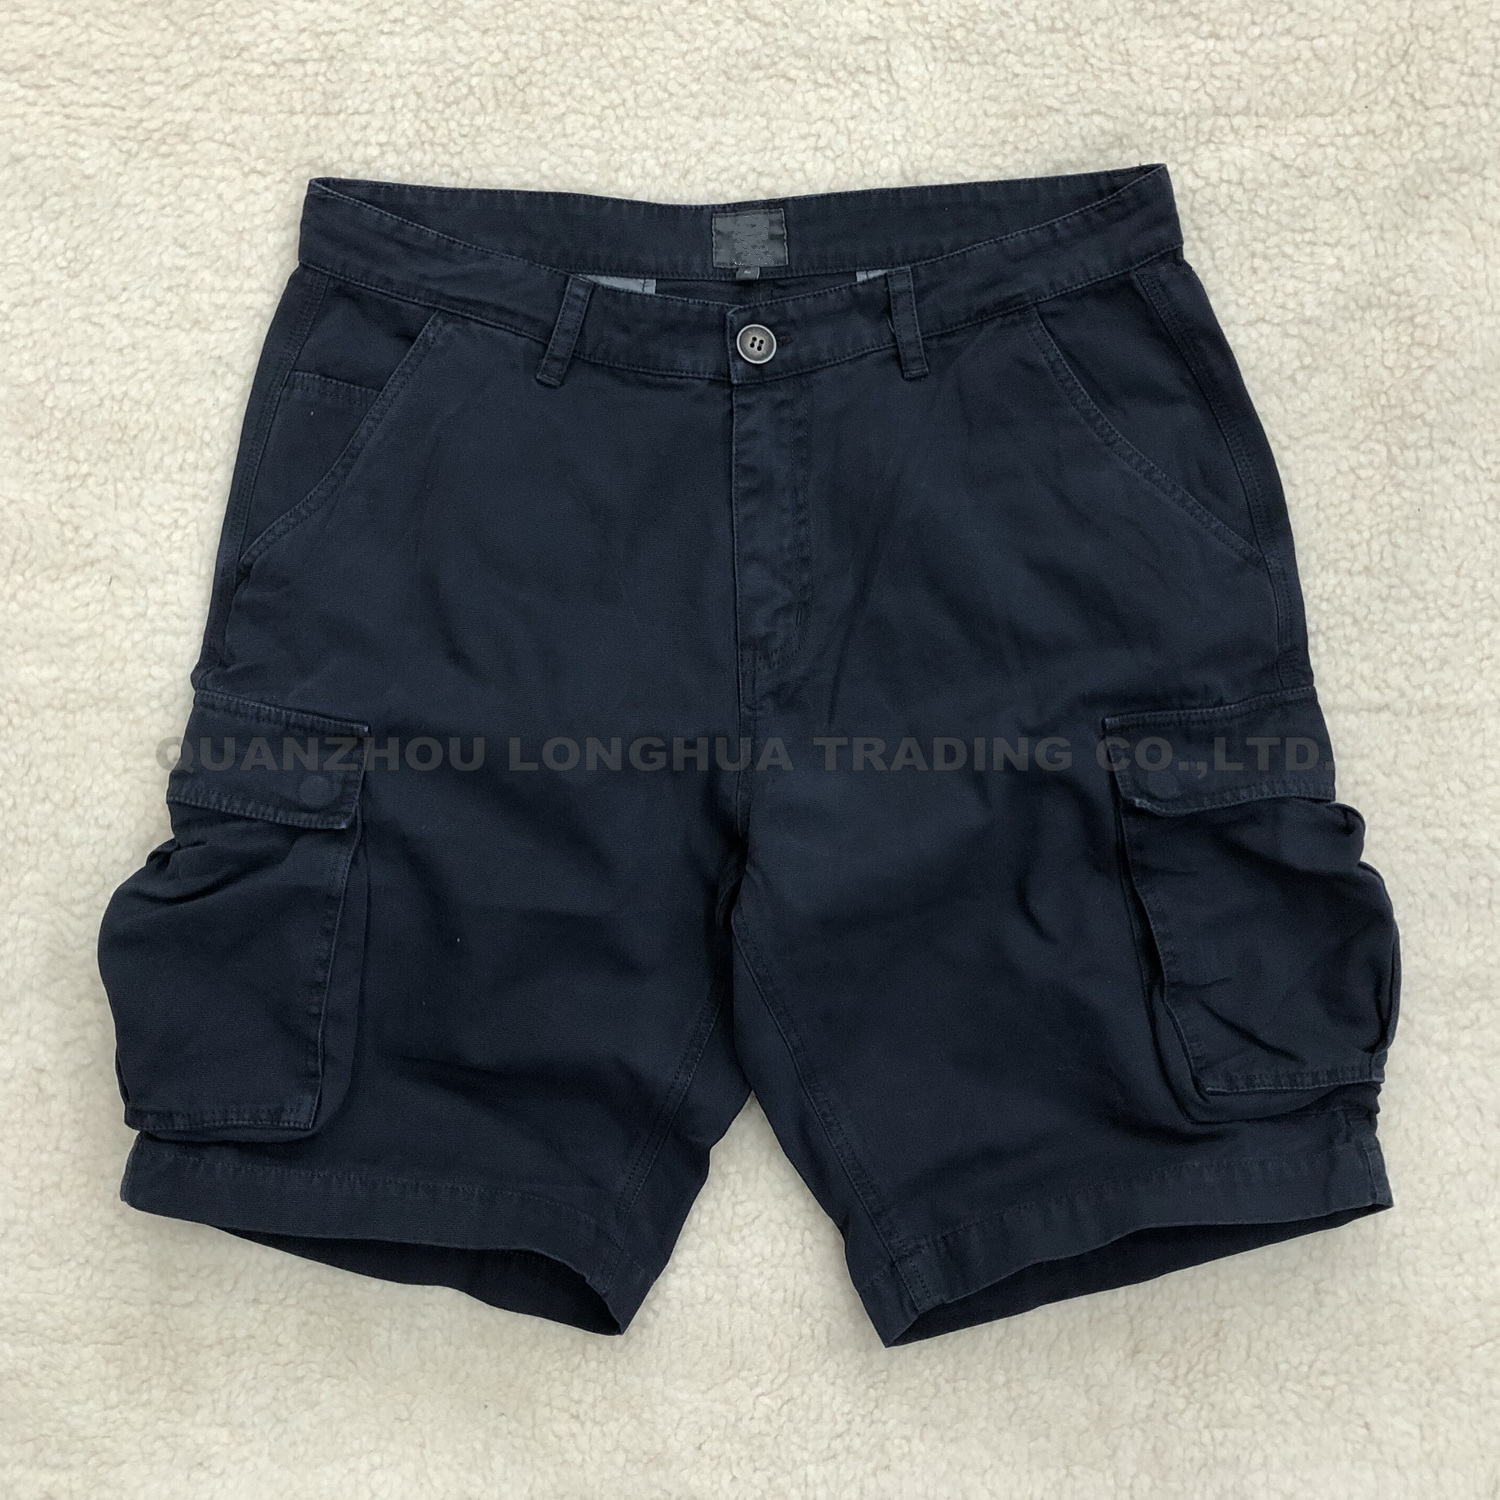 Mens Boys Cargo Shorts Pants Apparel Cotton Canvas Trousers Garment Dye with Snap Buttons